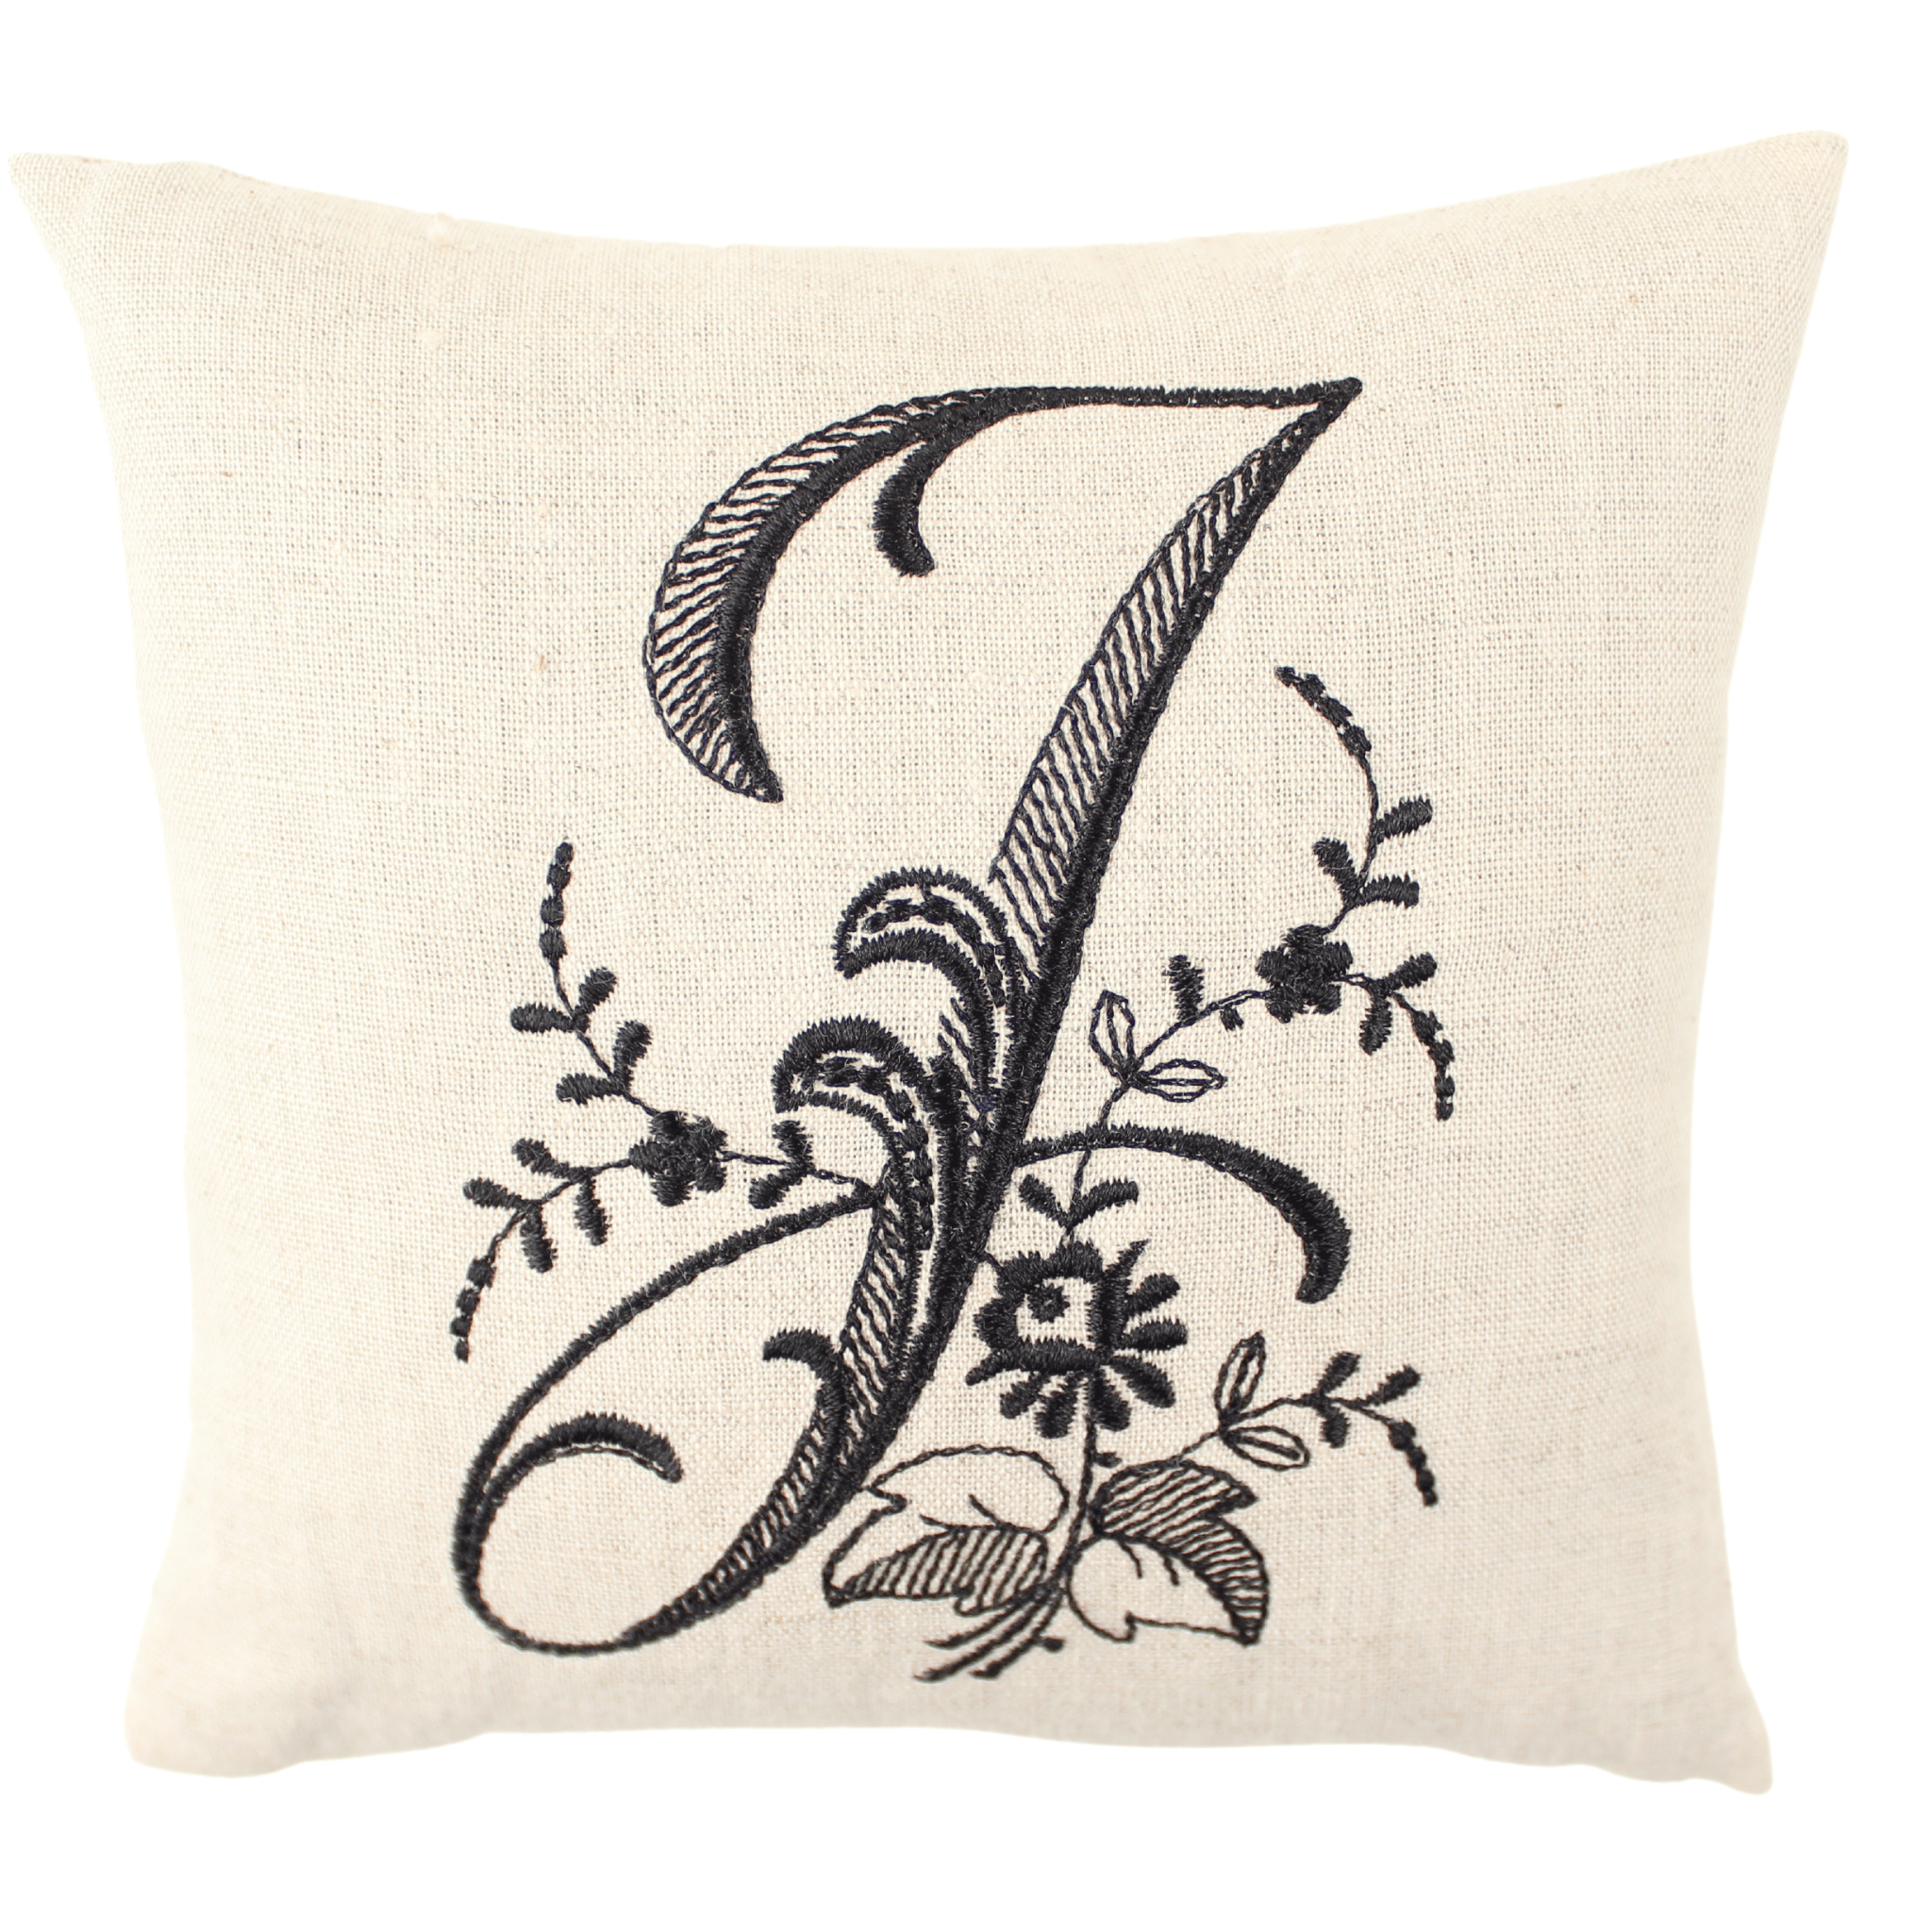 Monogrammed Pillow - Black (Letters sold individually)